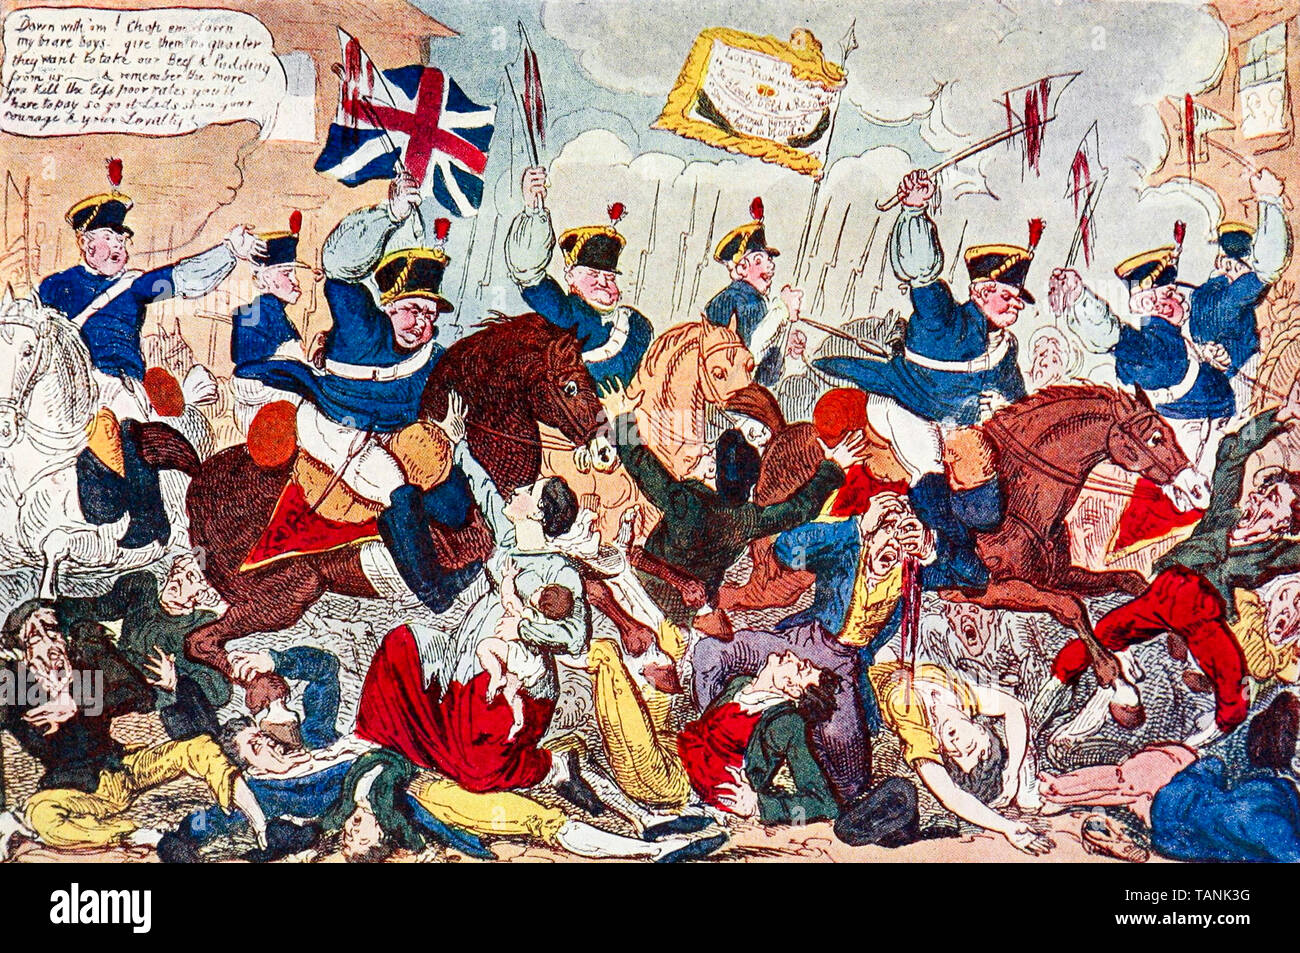 The Peterloo Massacre at Manchester, England, 16th August 1819, engraving, 1819 Stock Photo